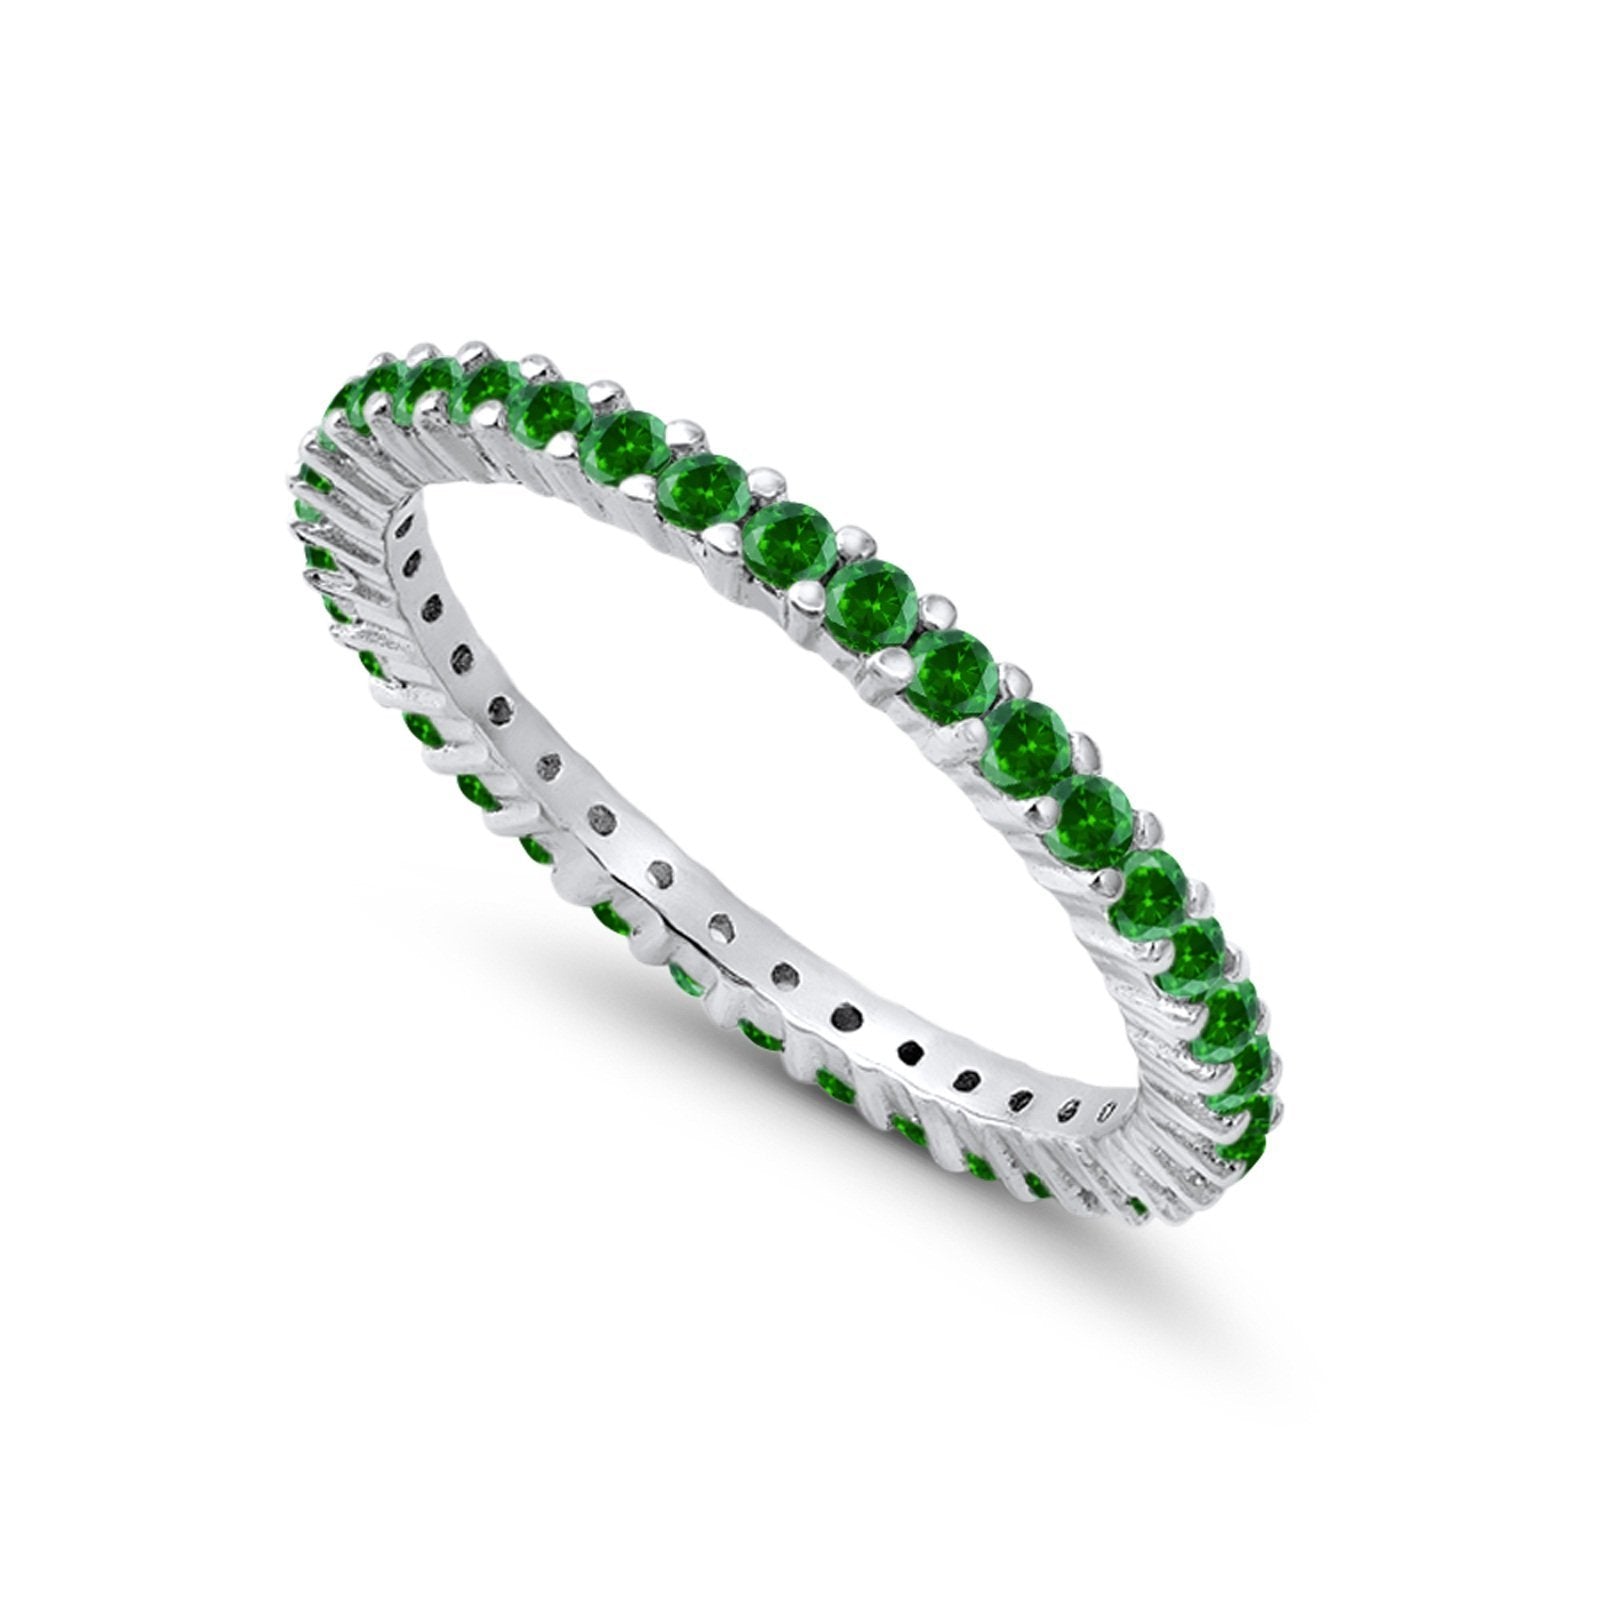 Full Eternity Wedding Band Round Simulated Green Emerald CZ Ring 925 Sterling Silver